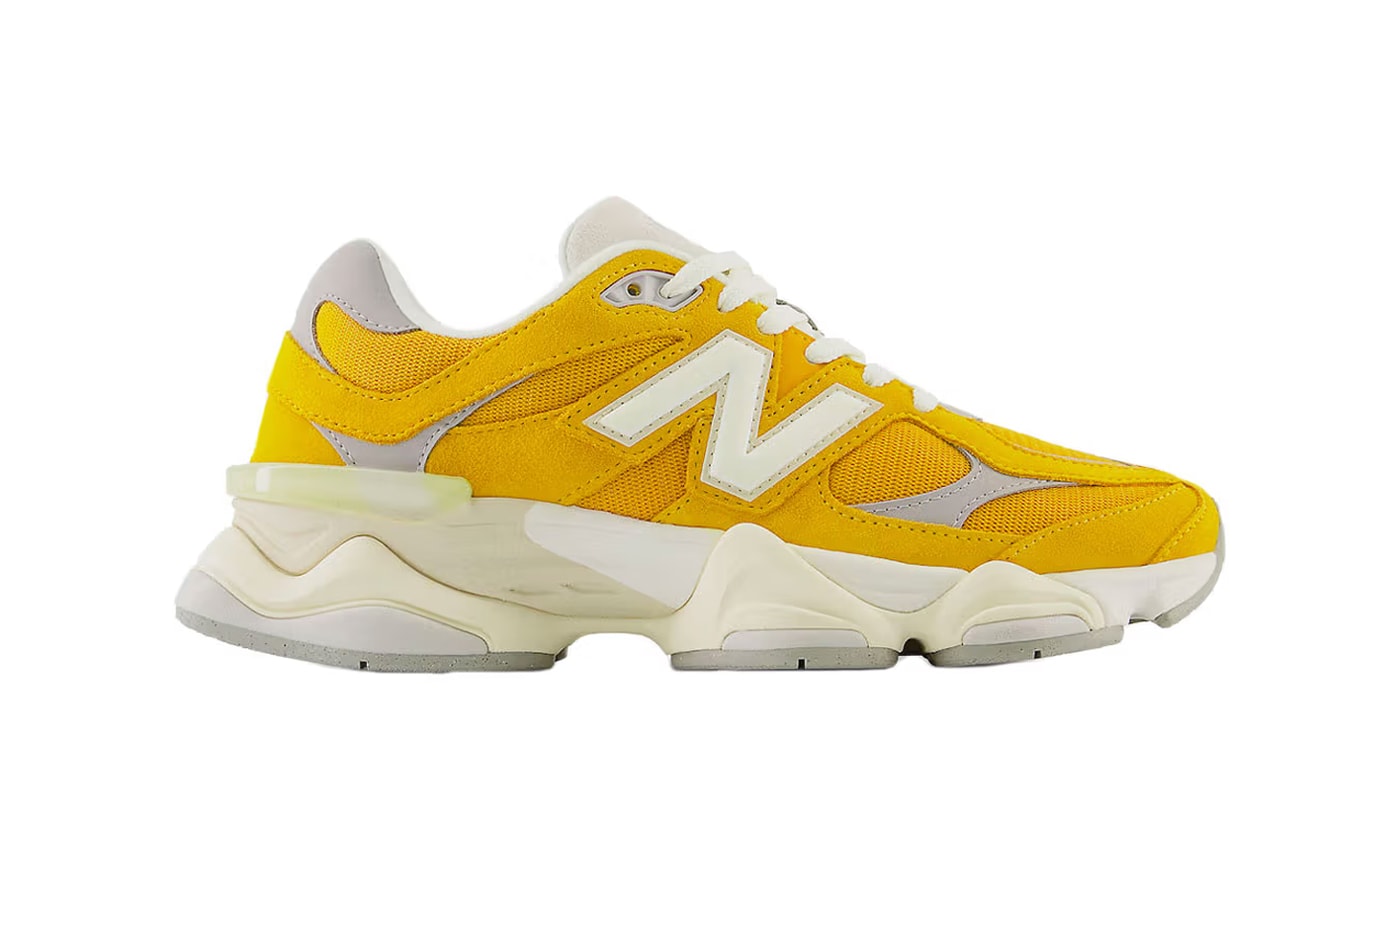 New Balance 9060 Yellow Suede Release Info